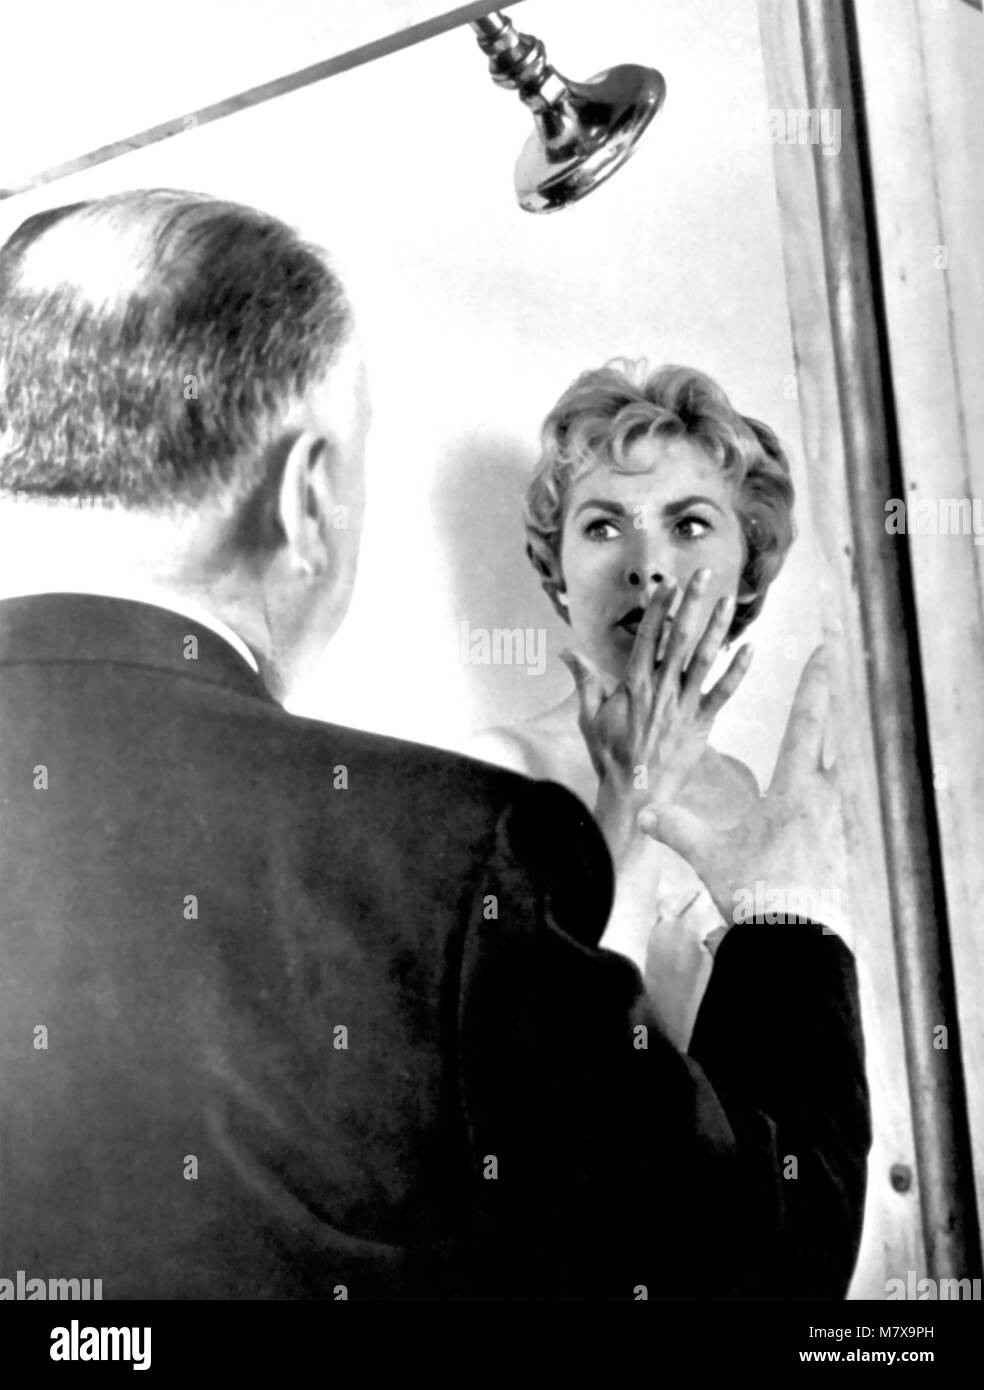 PSYCHO 1960 Paramount Pictures film  Alfred Hitchcock directing Janet Leigh in the shower scene Stock Photo